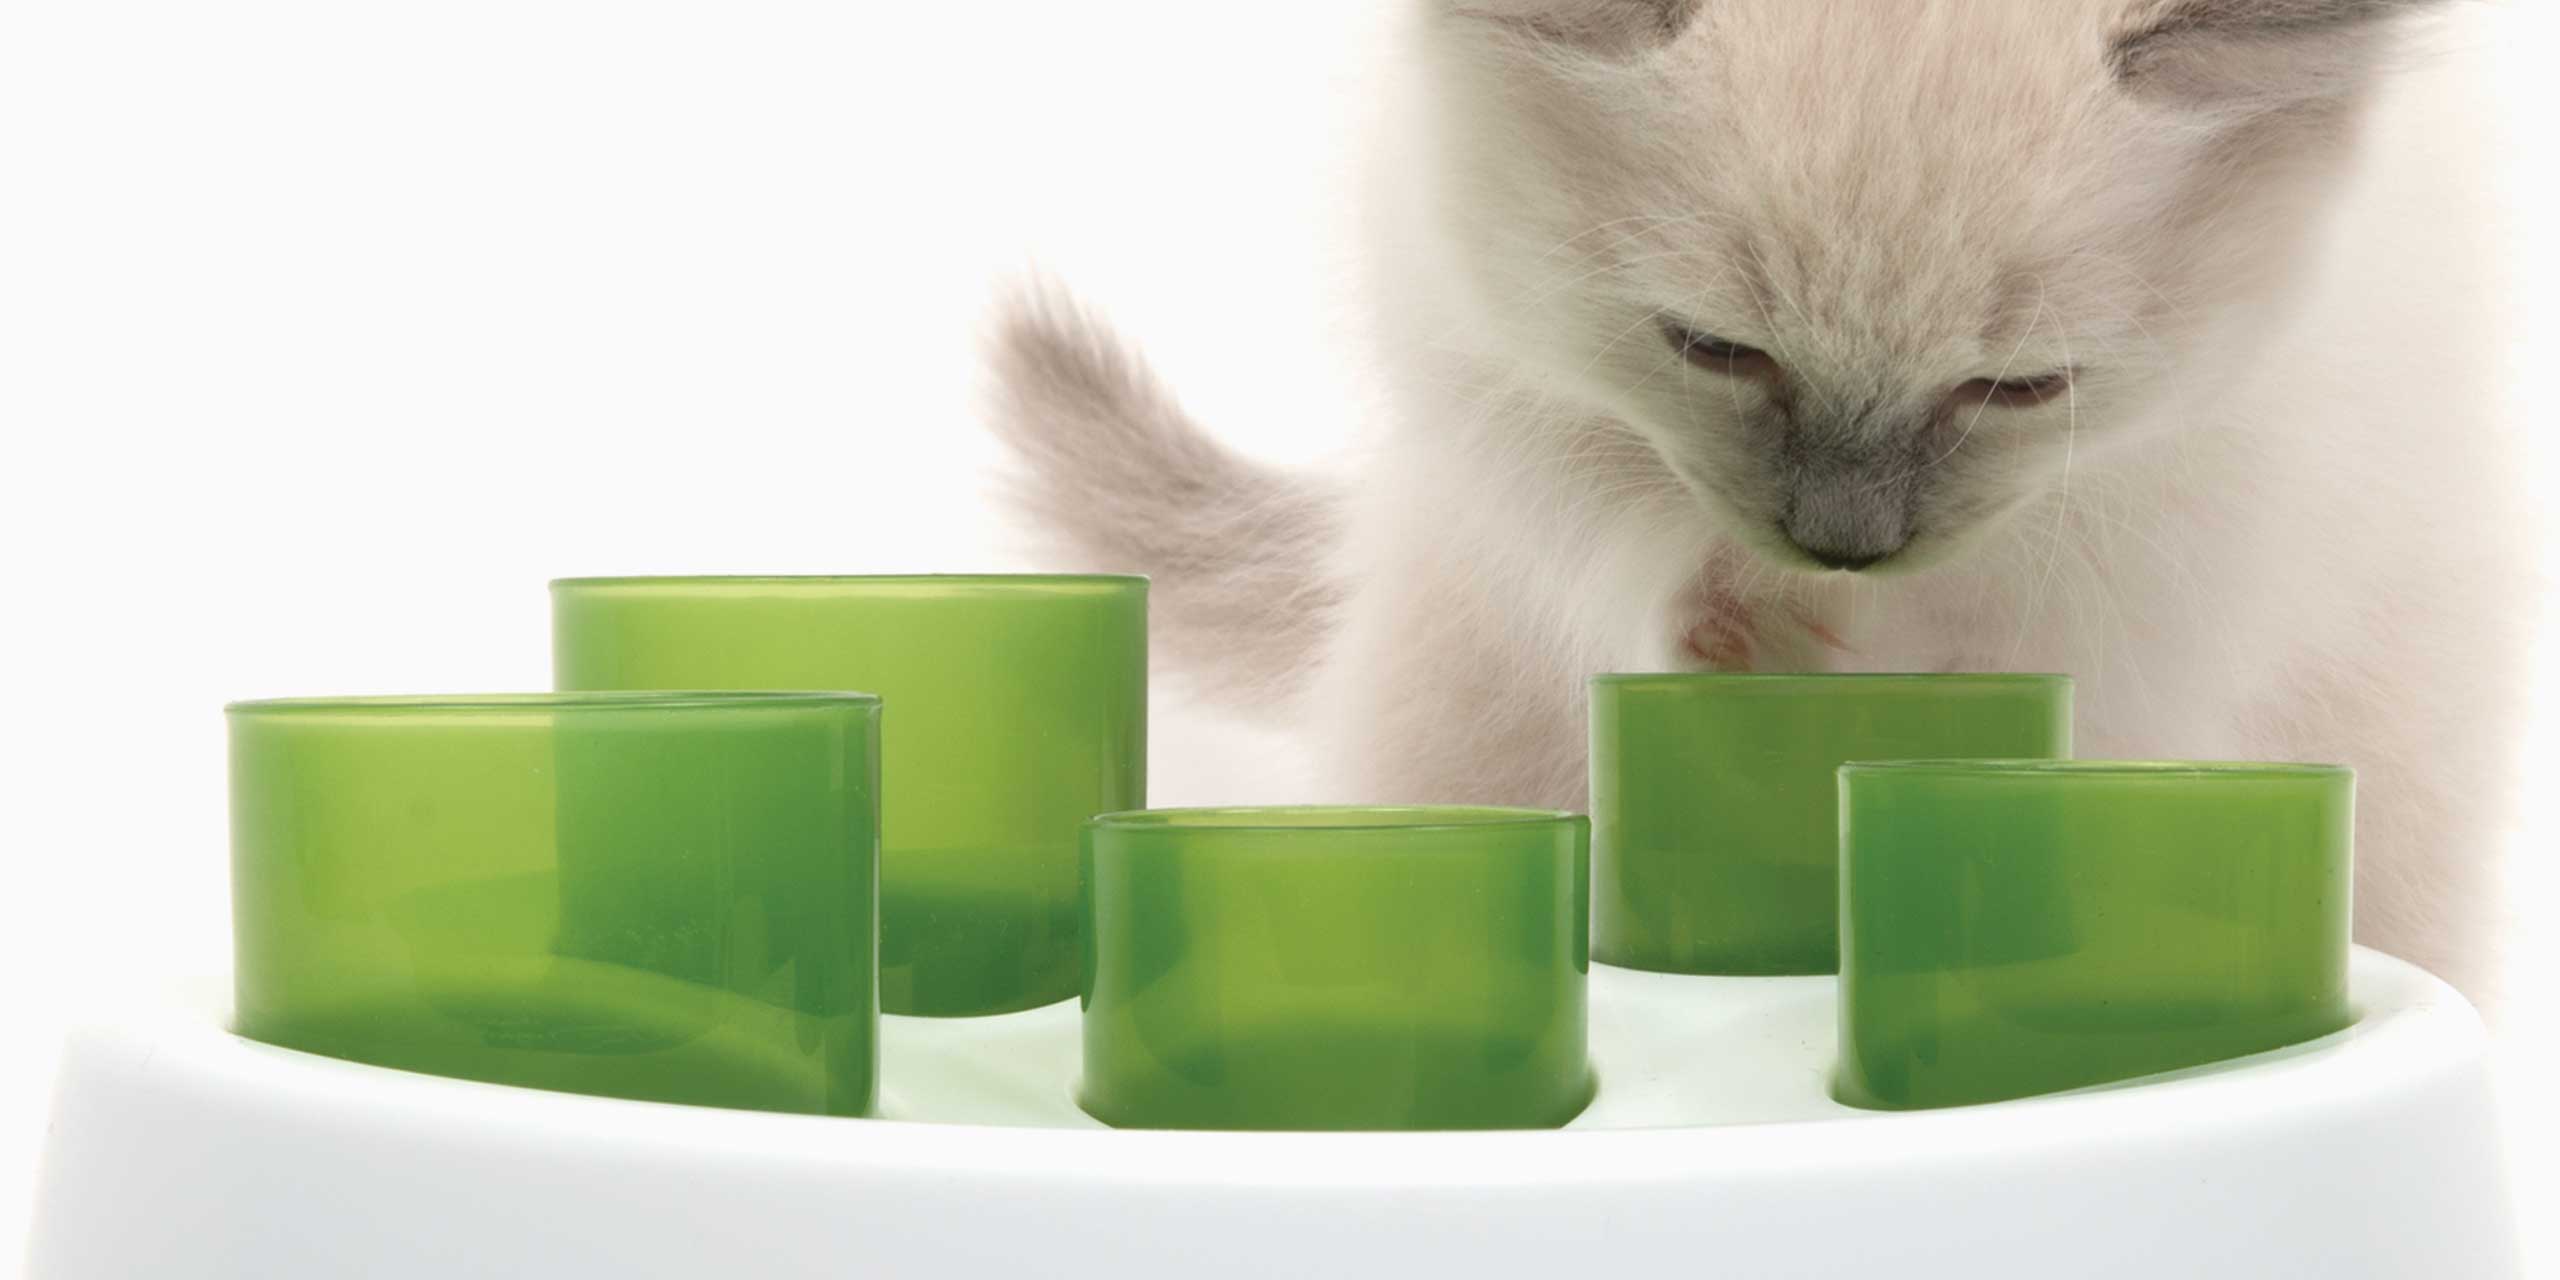 Cat looking for food or treats in cups